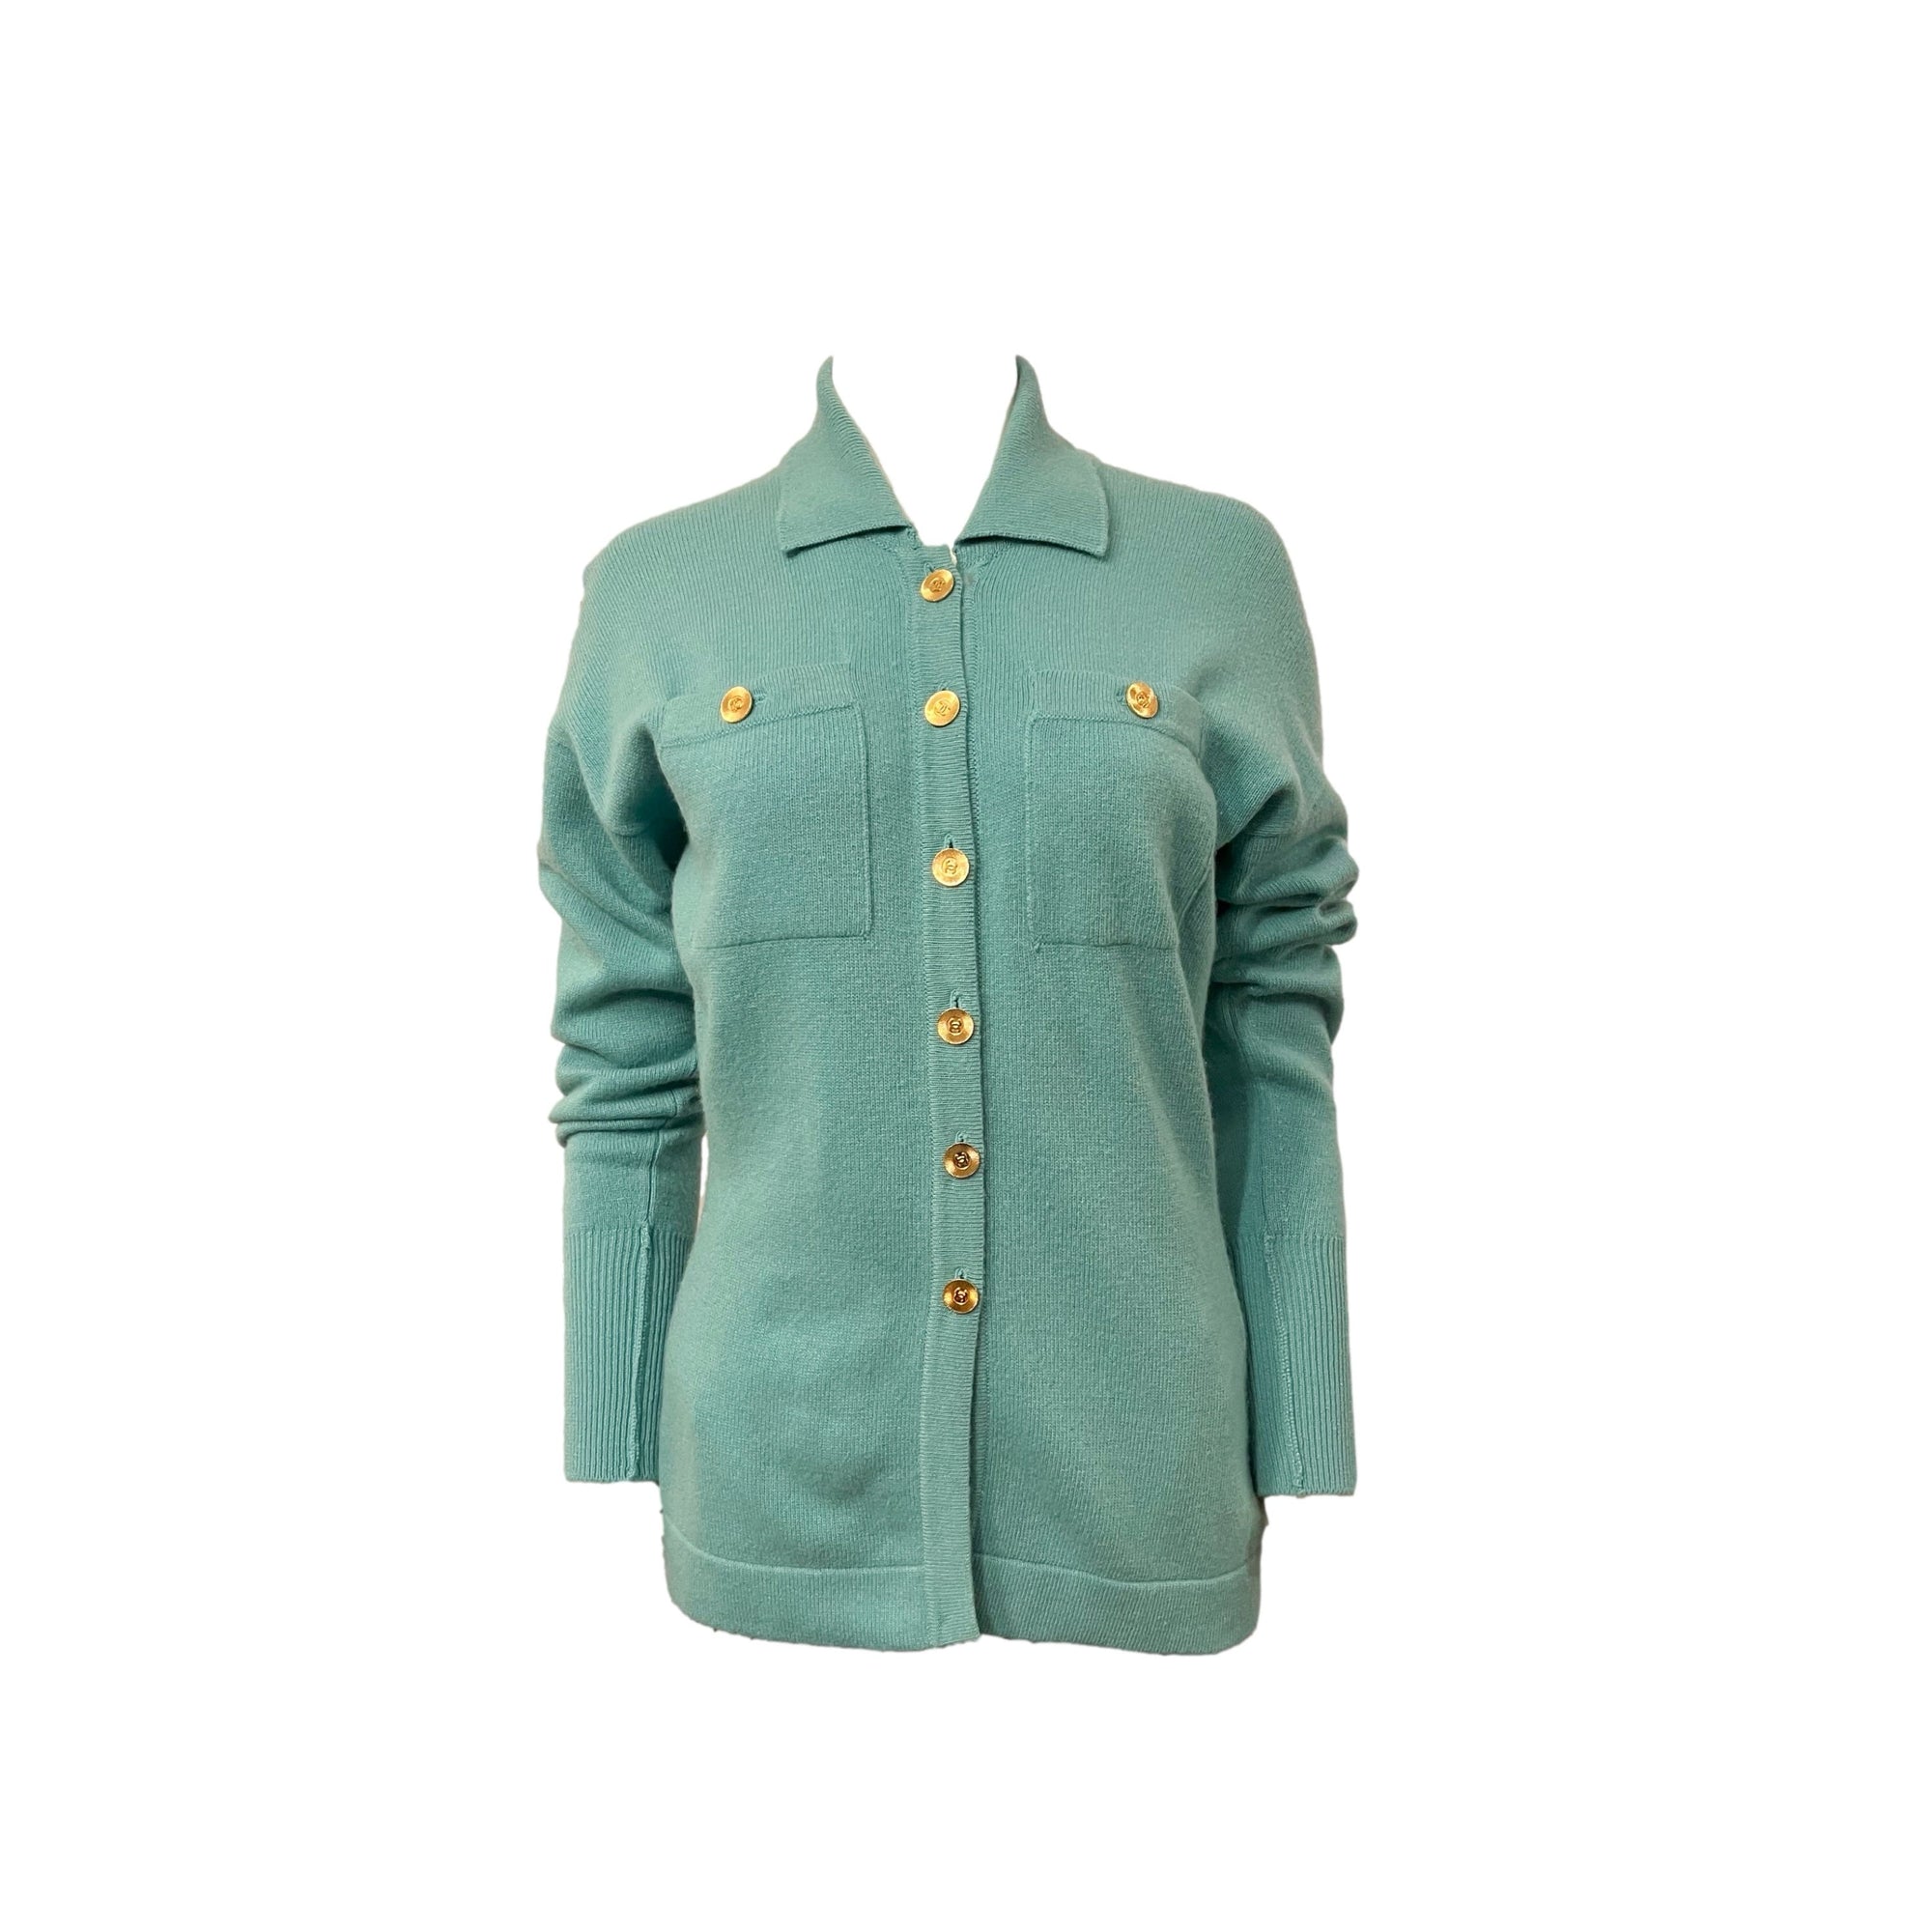 Chanel Turquoise Logo Button Cashmere Cardigan - Apparel